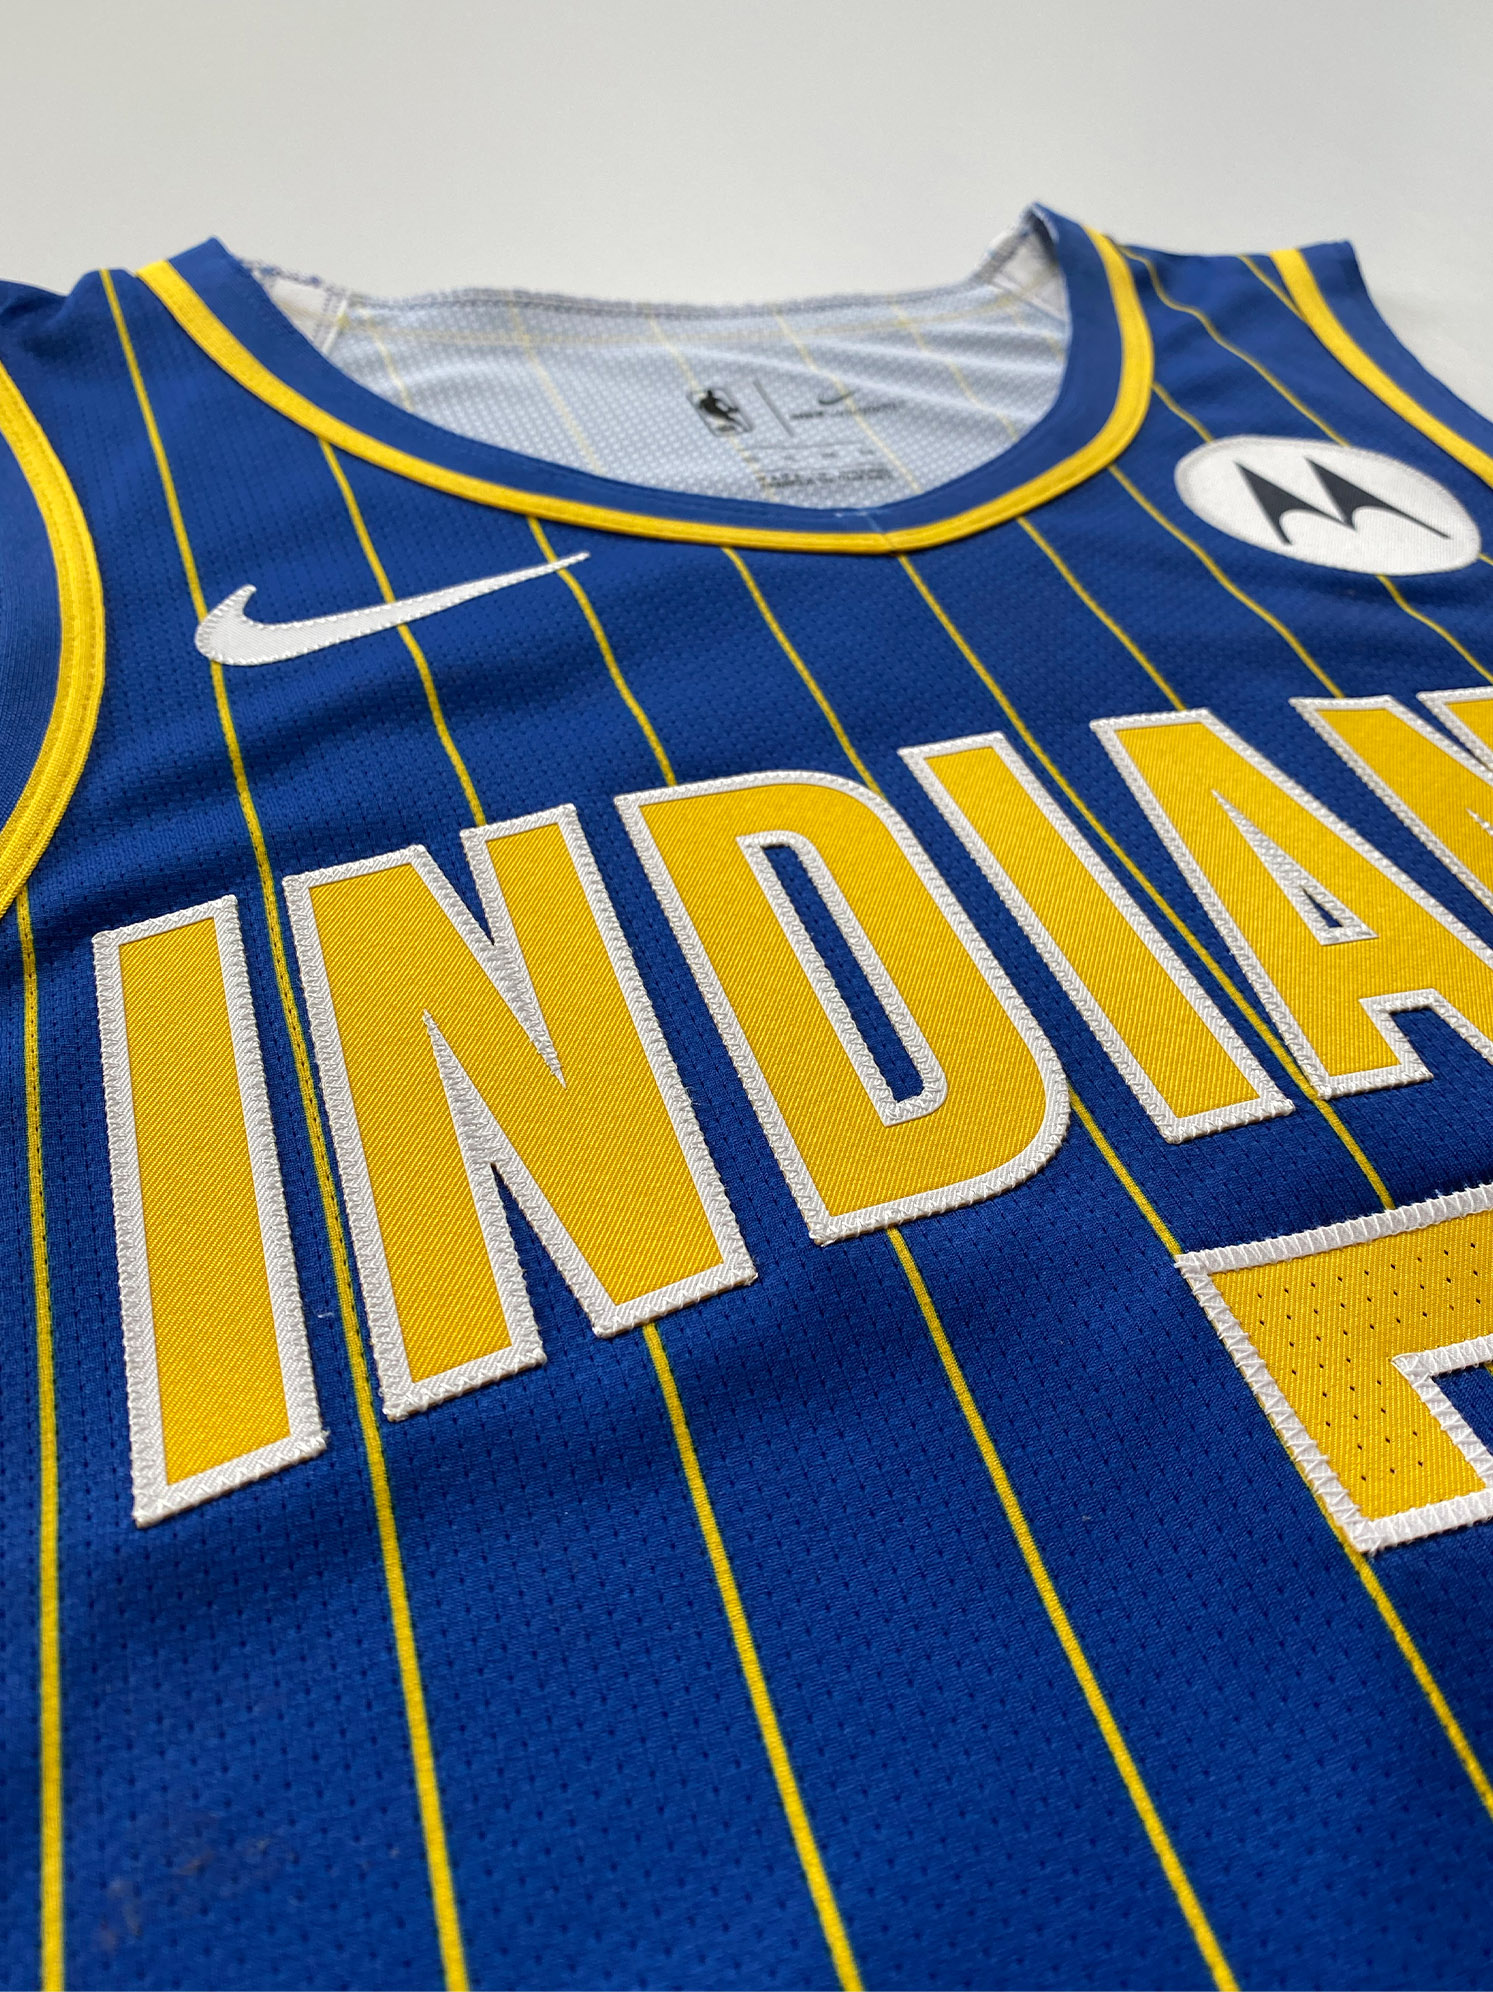 Pacers' Nike City jerseys unveiled